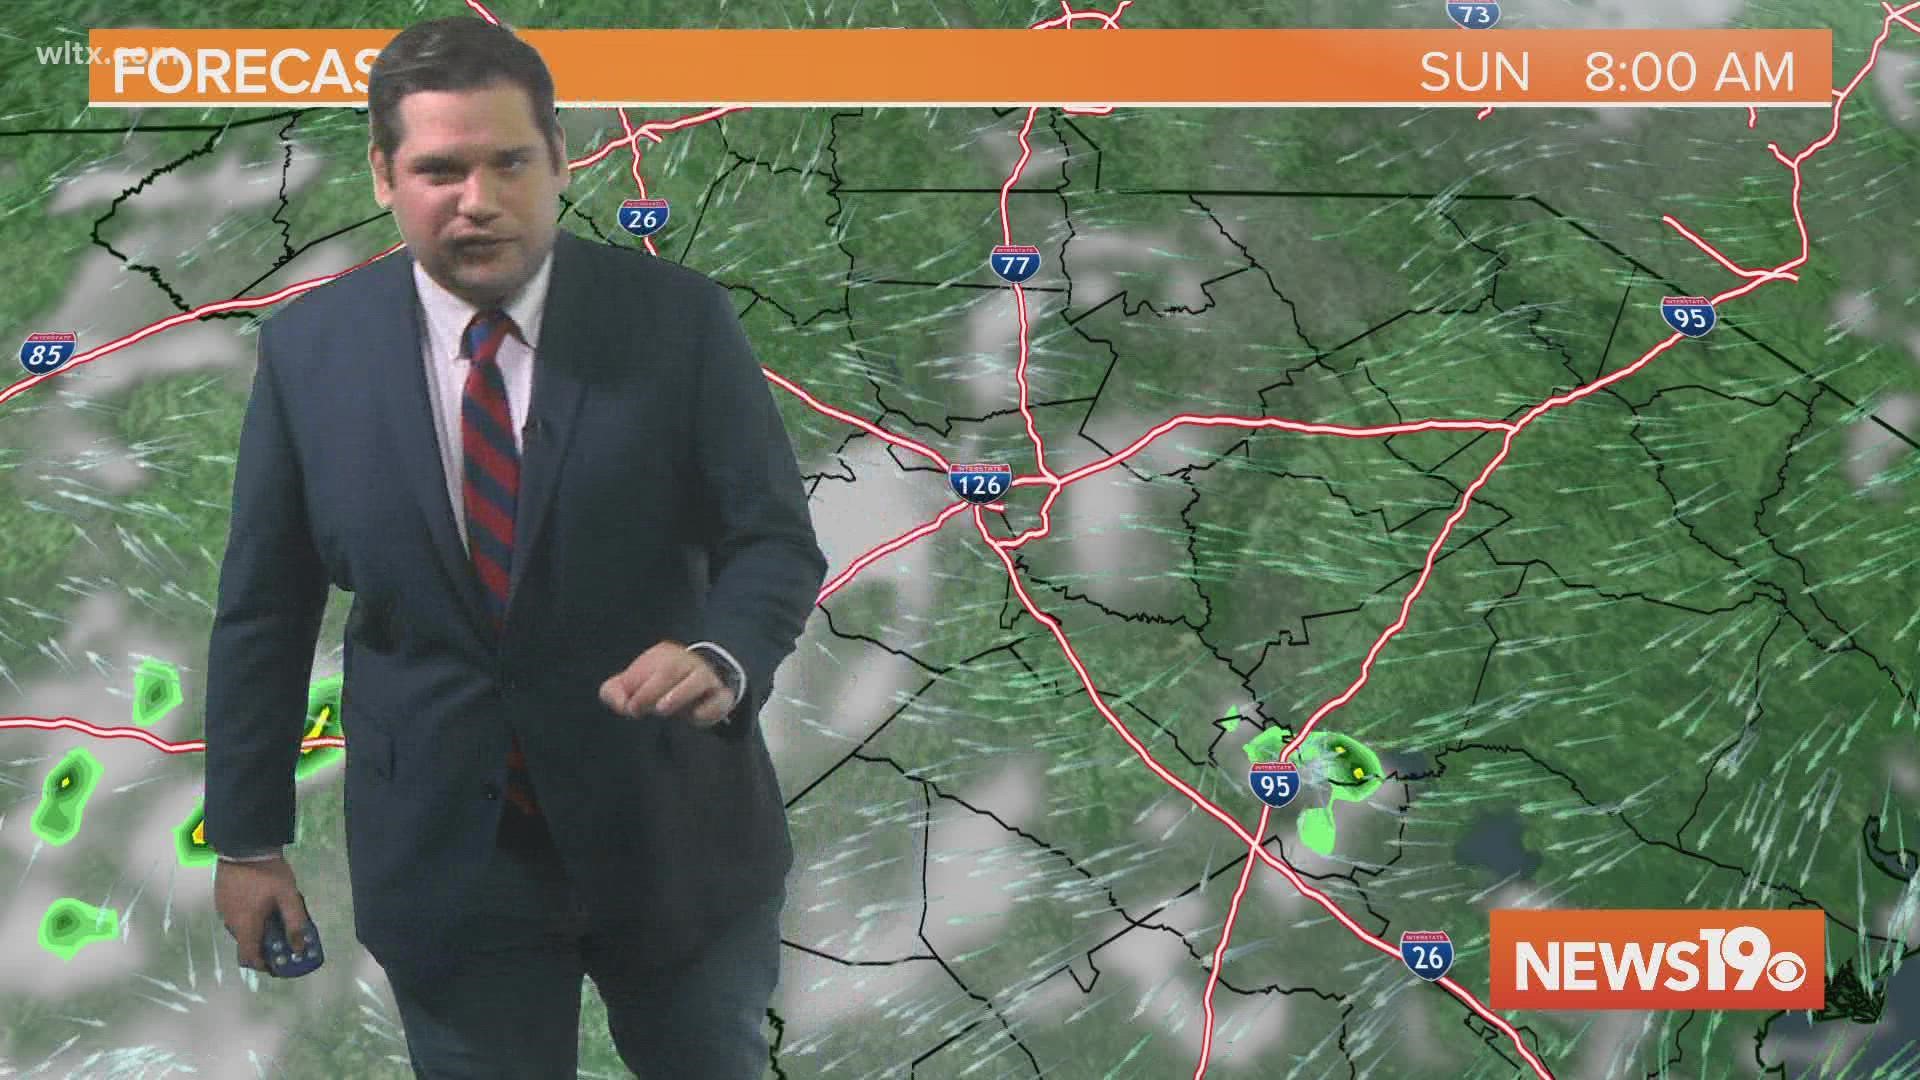 We are looking at another round of storms Sunday in the Midlands.